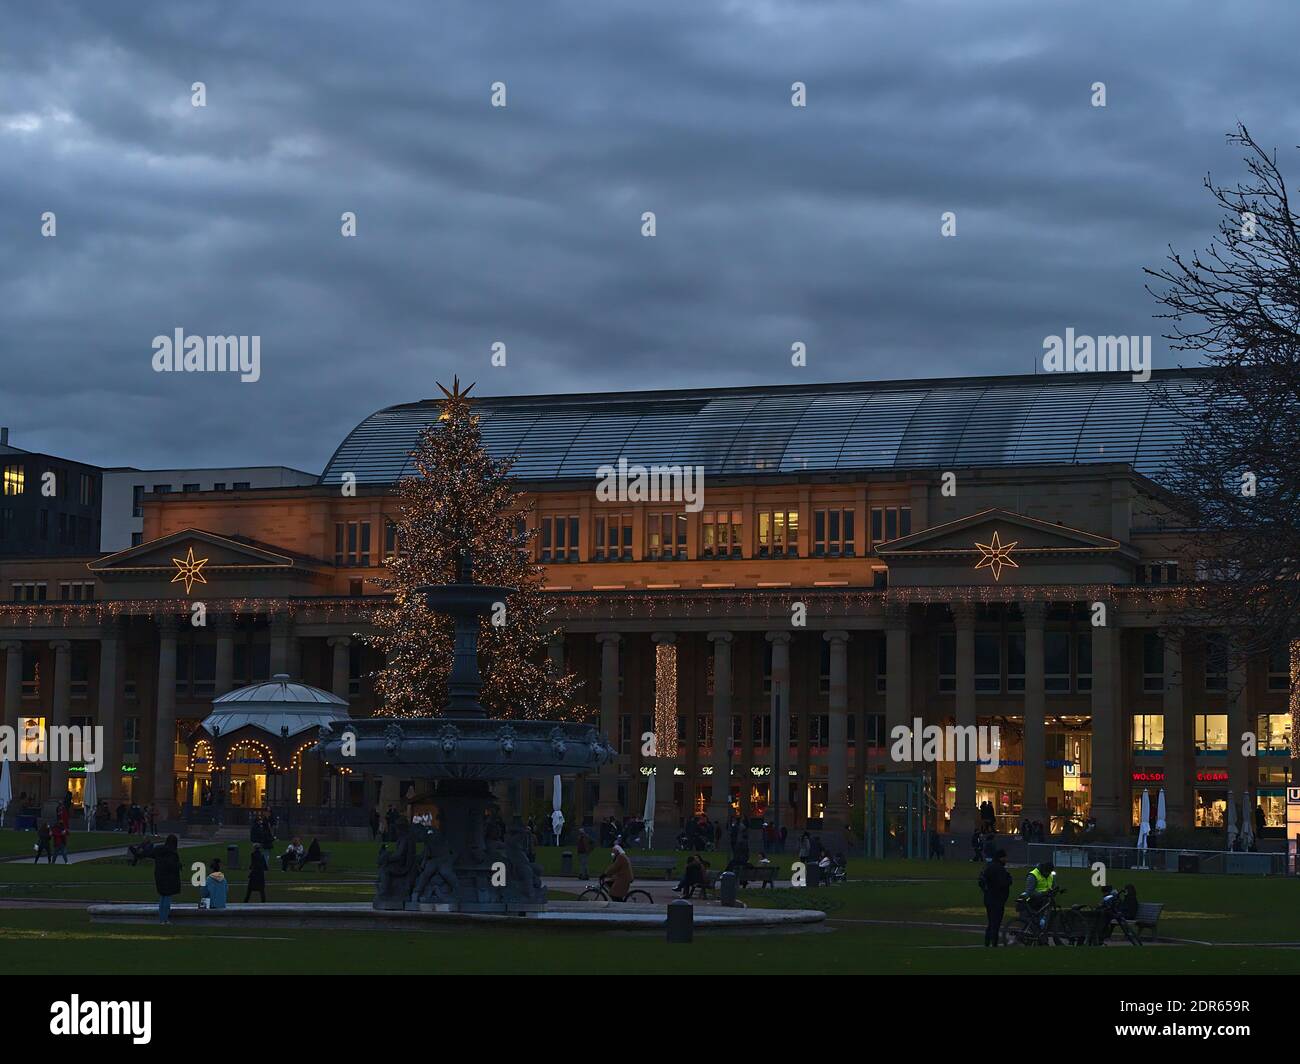 People relaxing on popular square Schlossplatz in city center in front of historic building Königsbau during Christmas time with decorations. Stock Photo